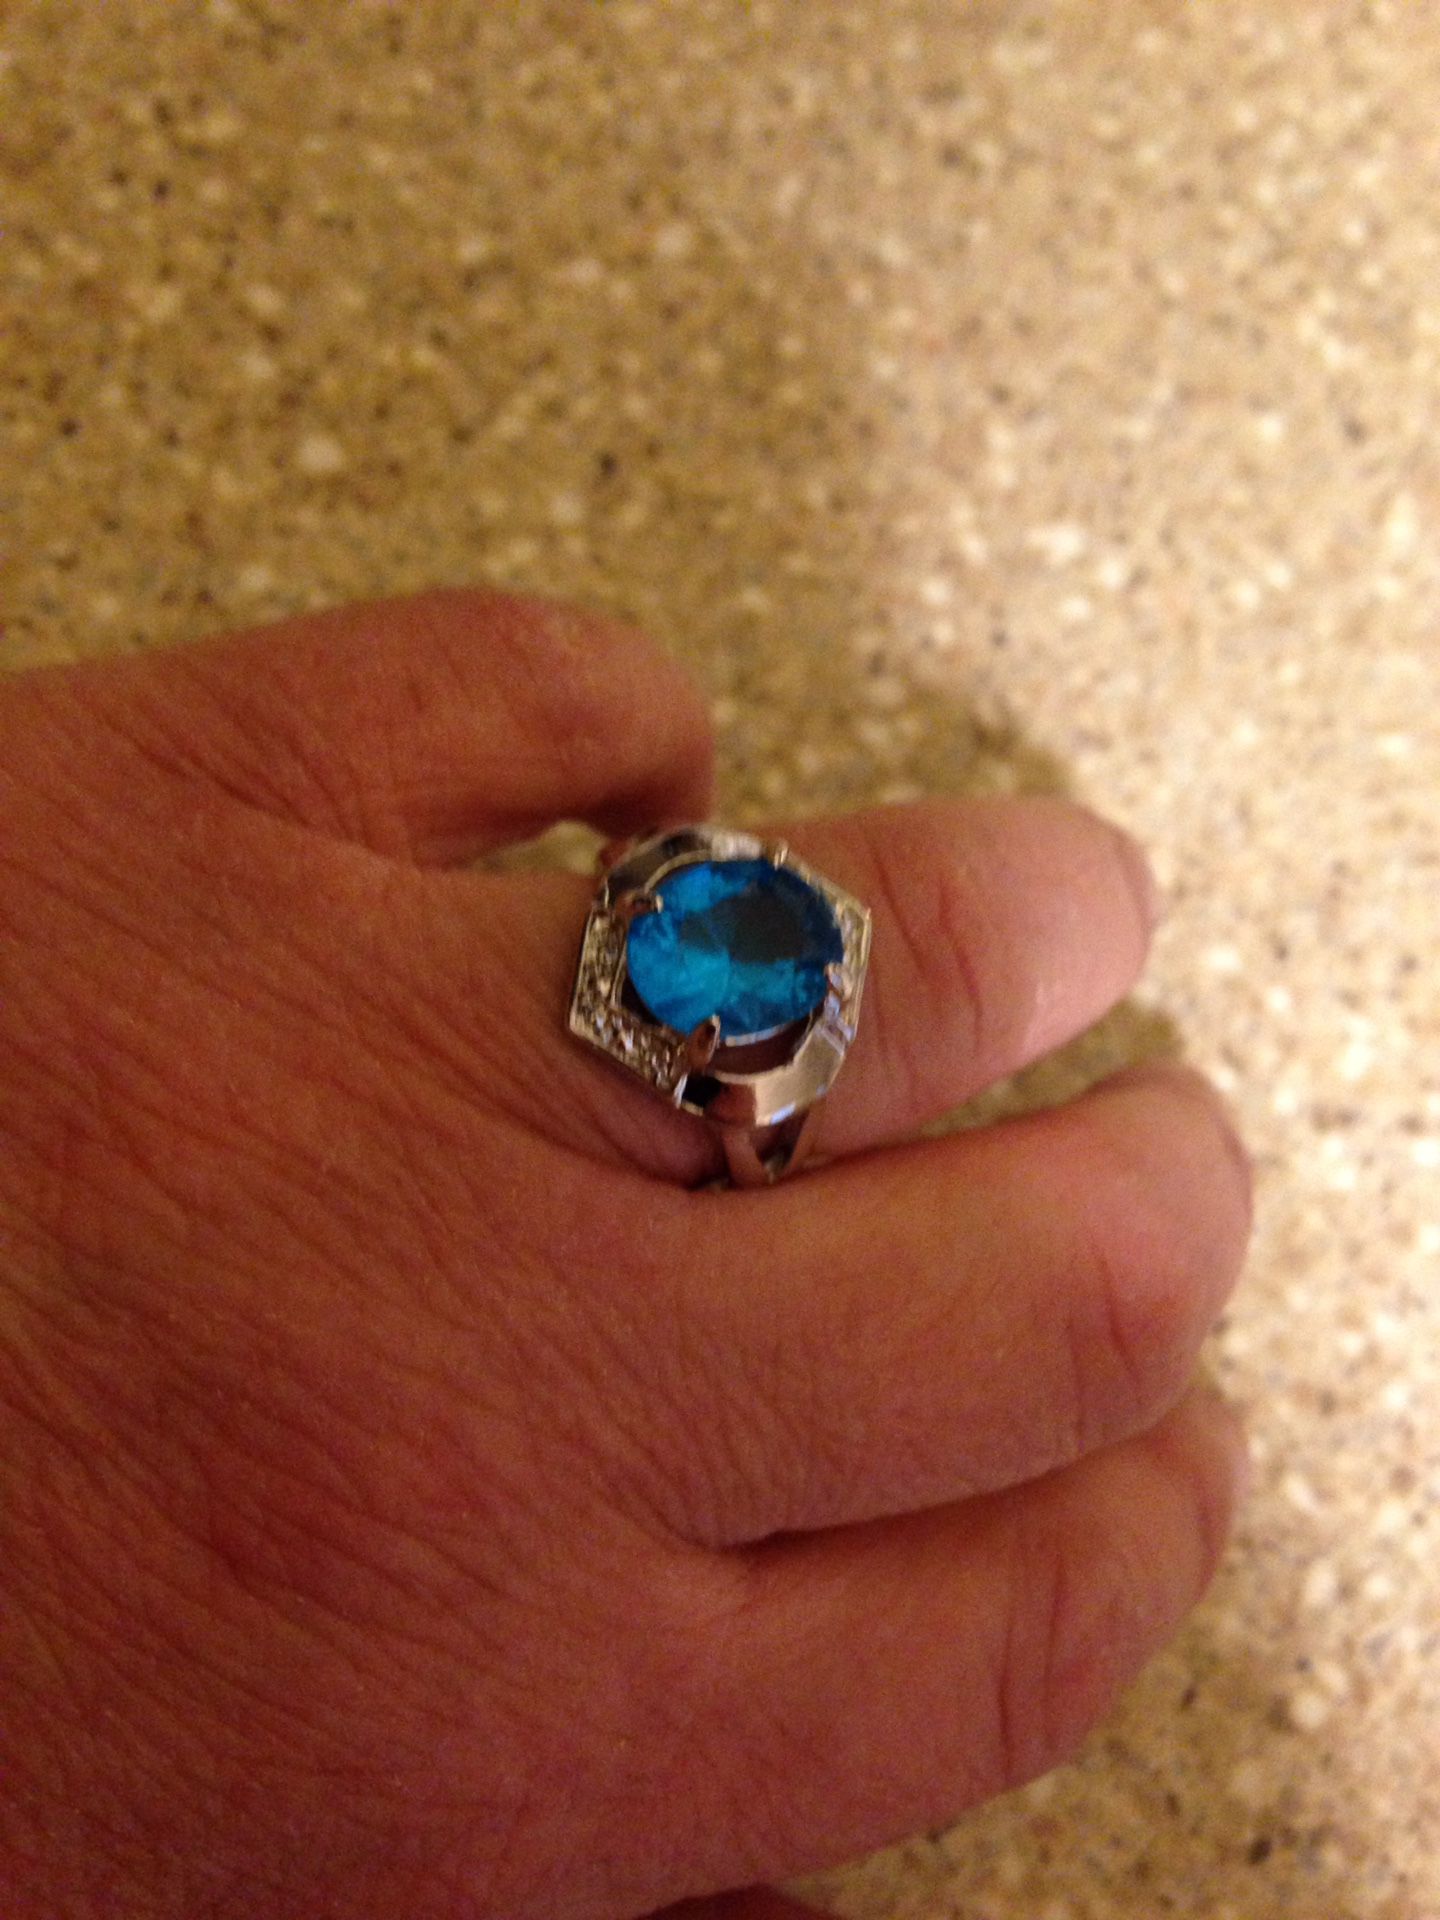 Turquoise Color Silver Plated Ring Size 9. Brand New